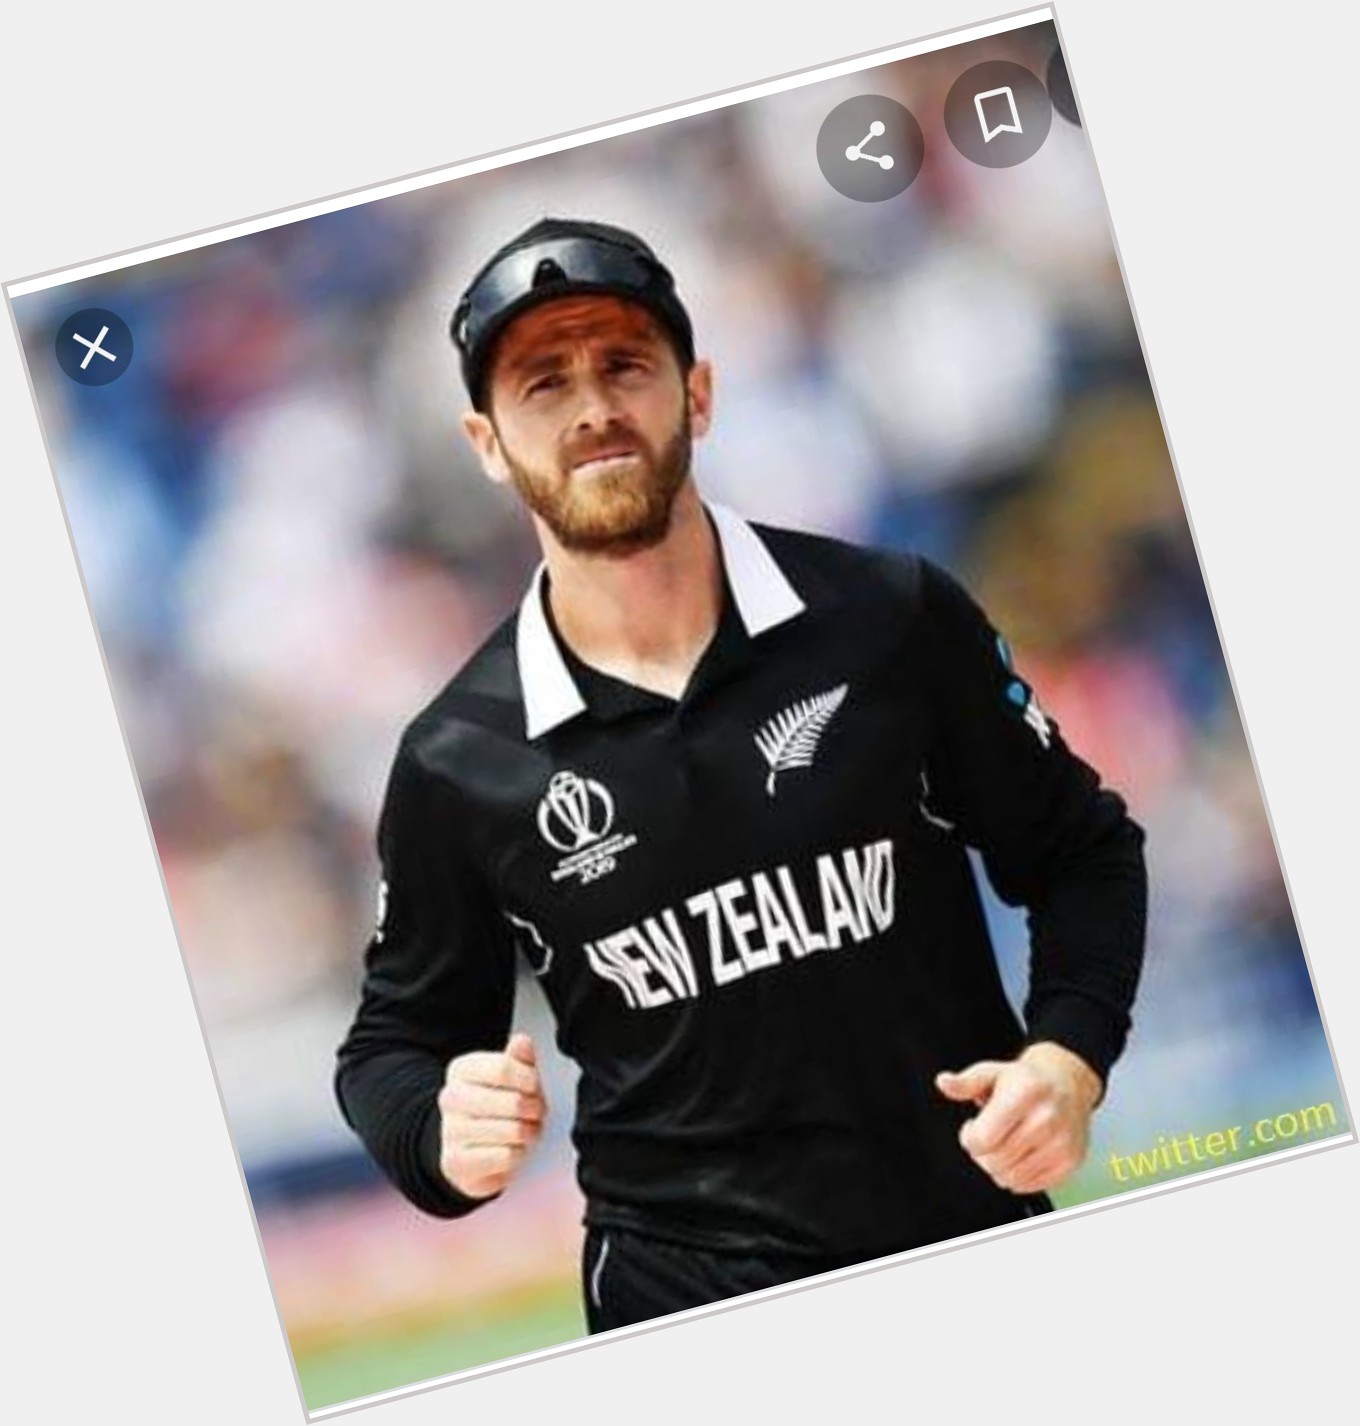 Happy Birthday Kane Williamson the great human being & finest player to play a cricket 